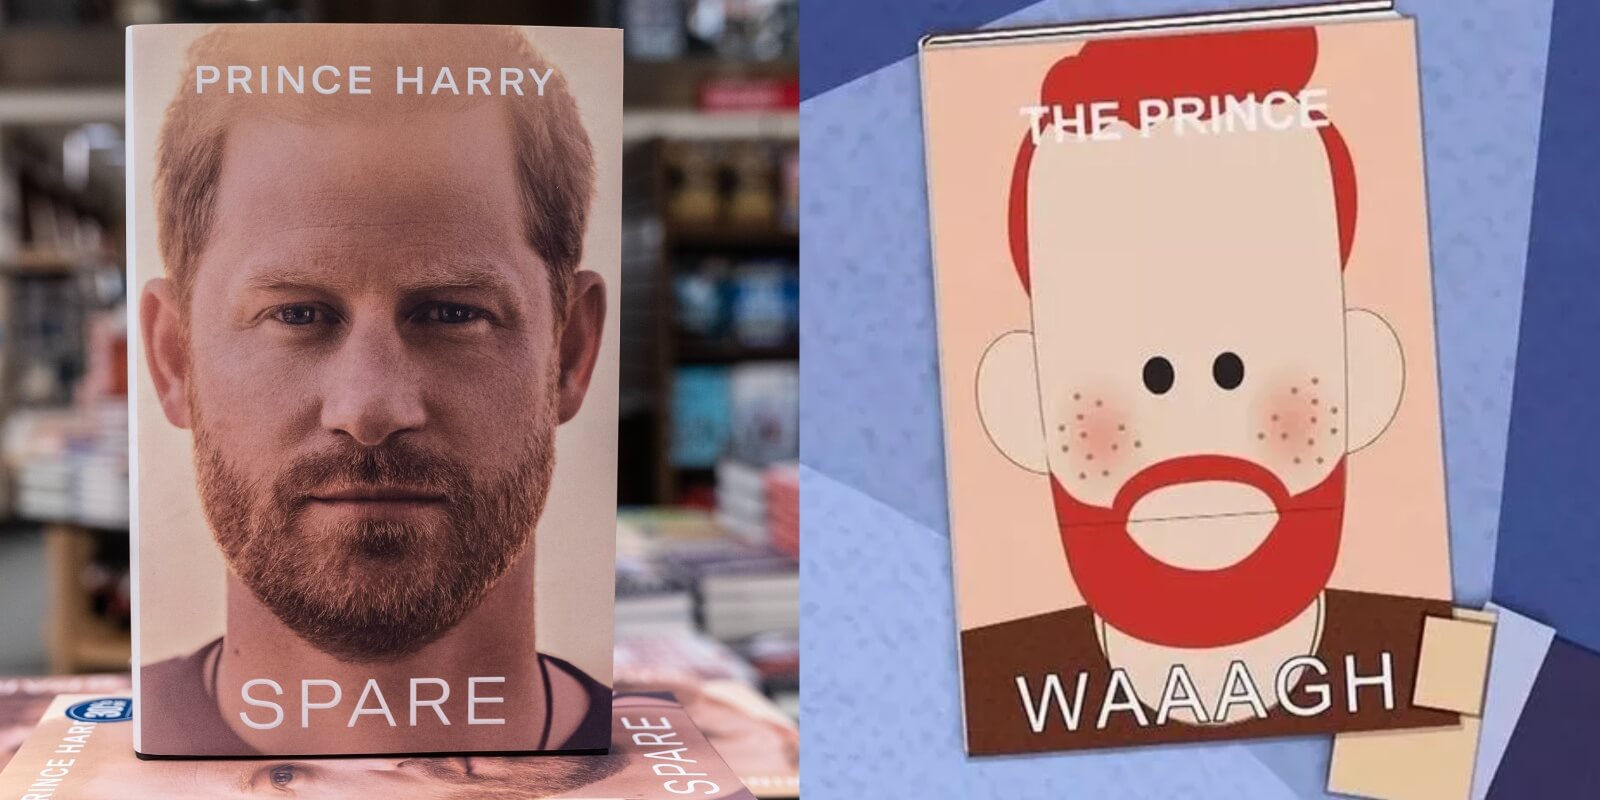 The cover of Prince Harry's book 'Spare' and 'South Park's' lampooned cover titled 'Waaagh.'